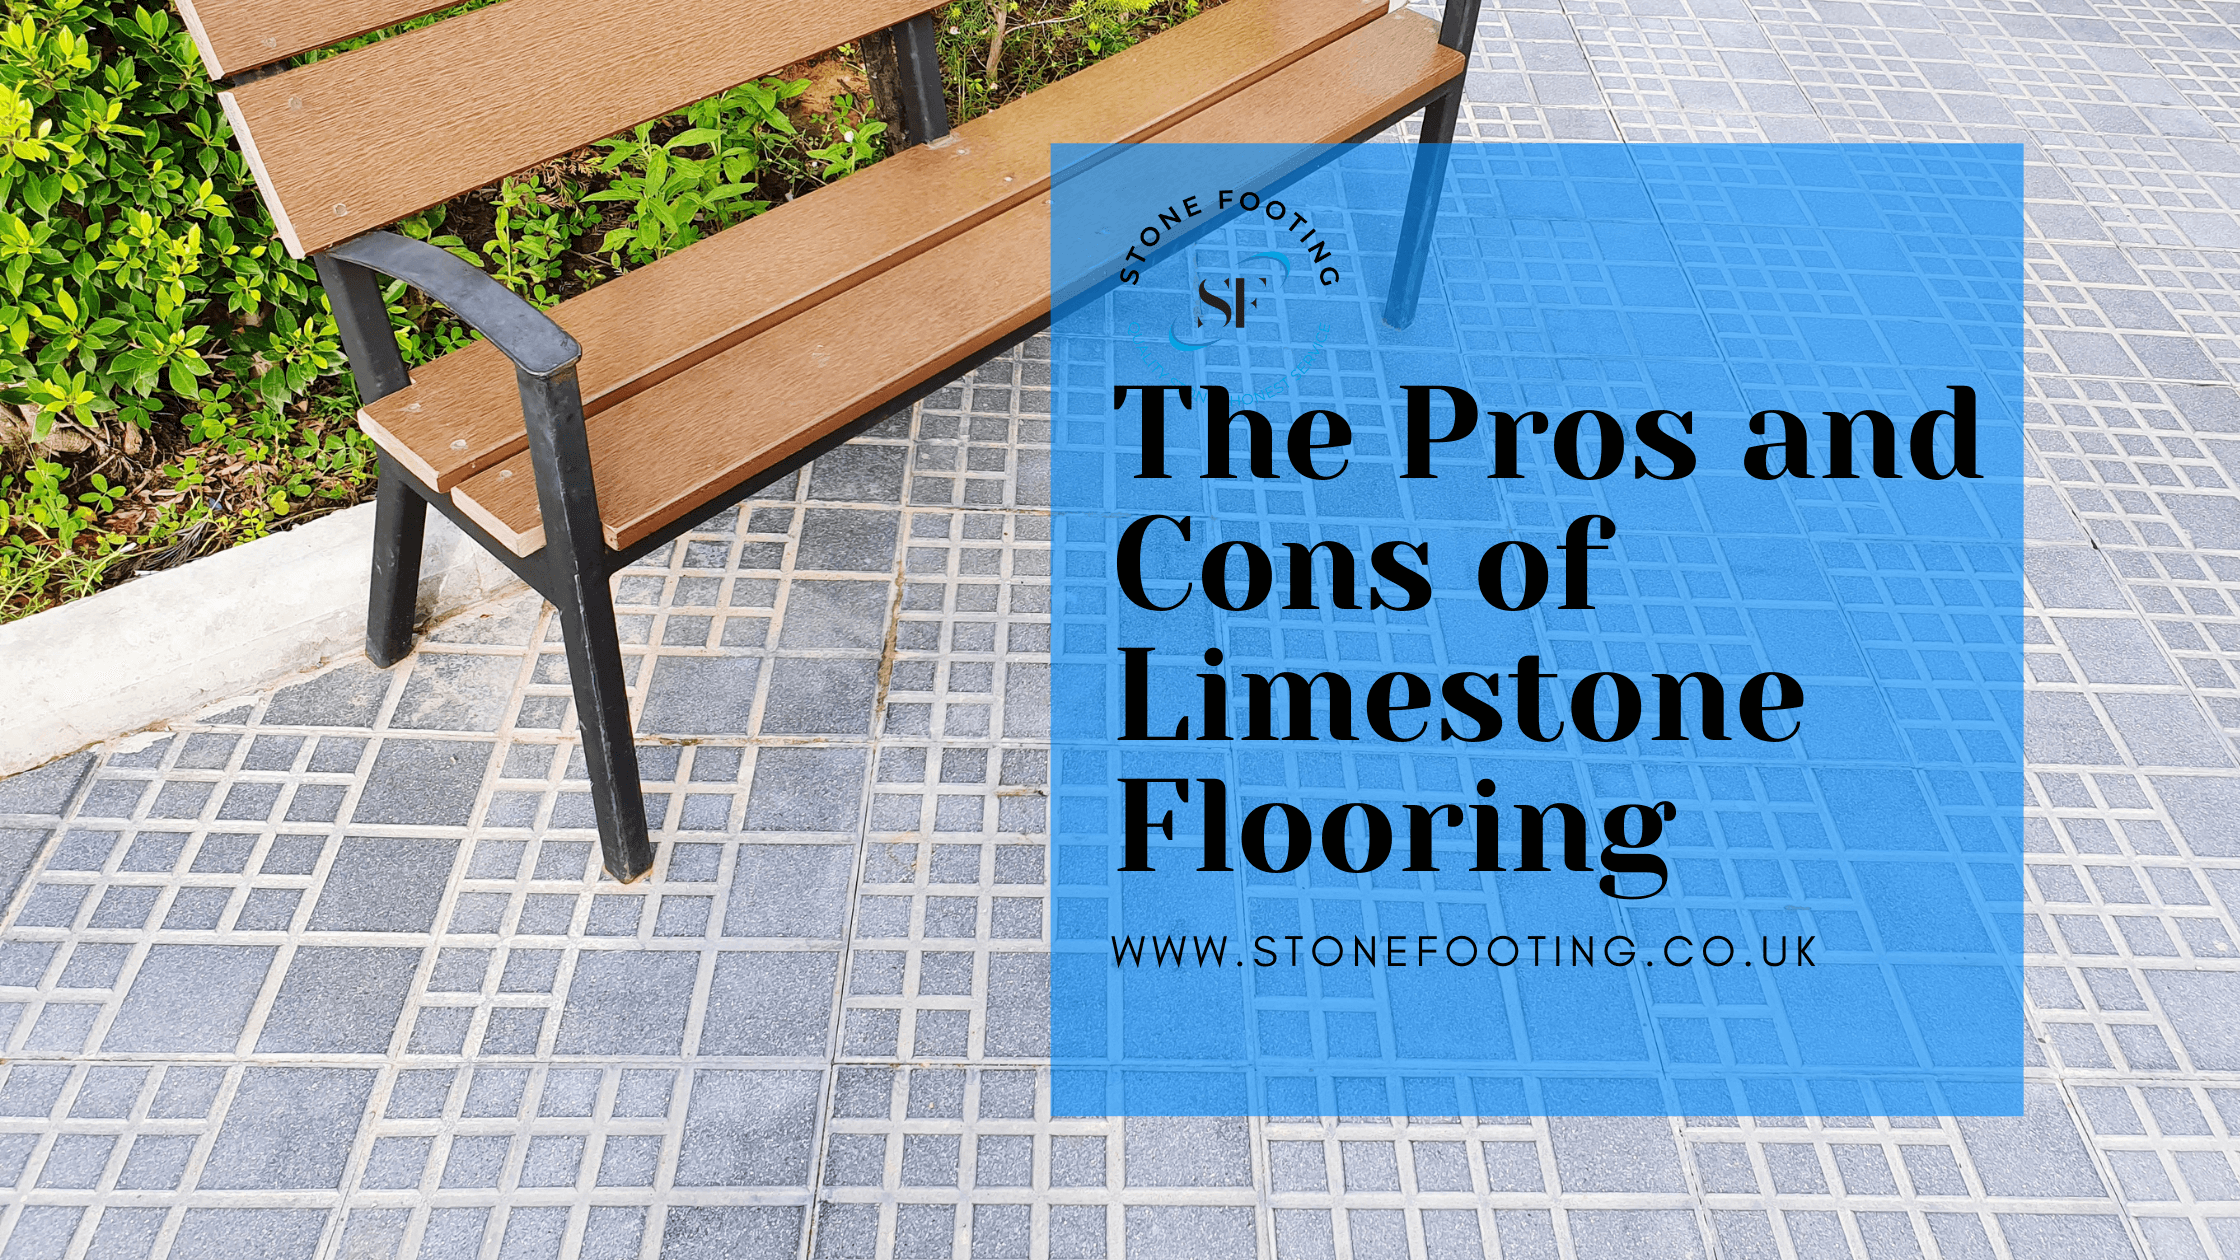 The Pros and Cons of Limestone Flooring